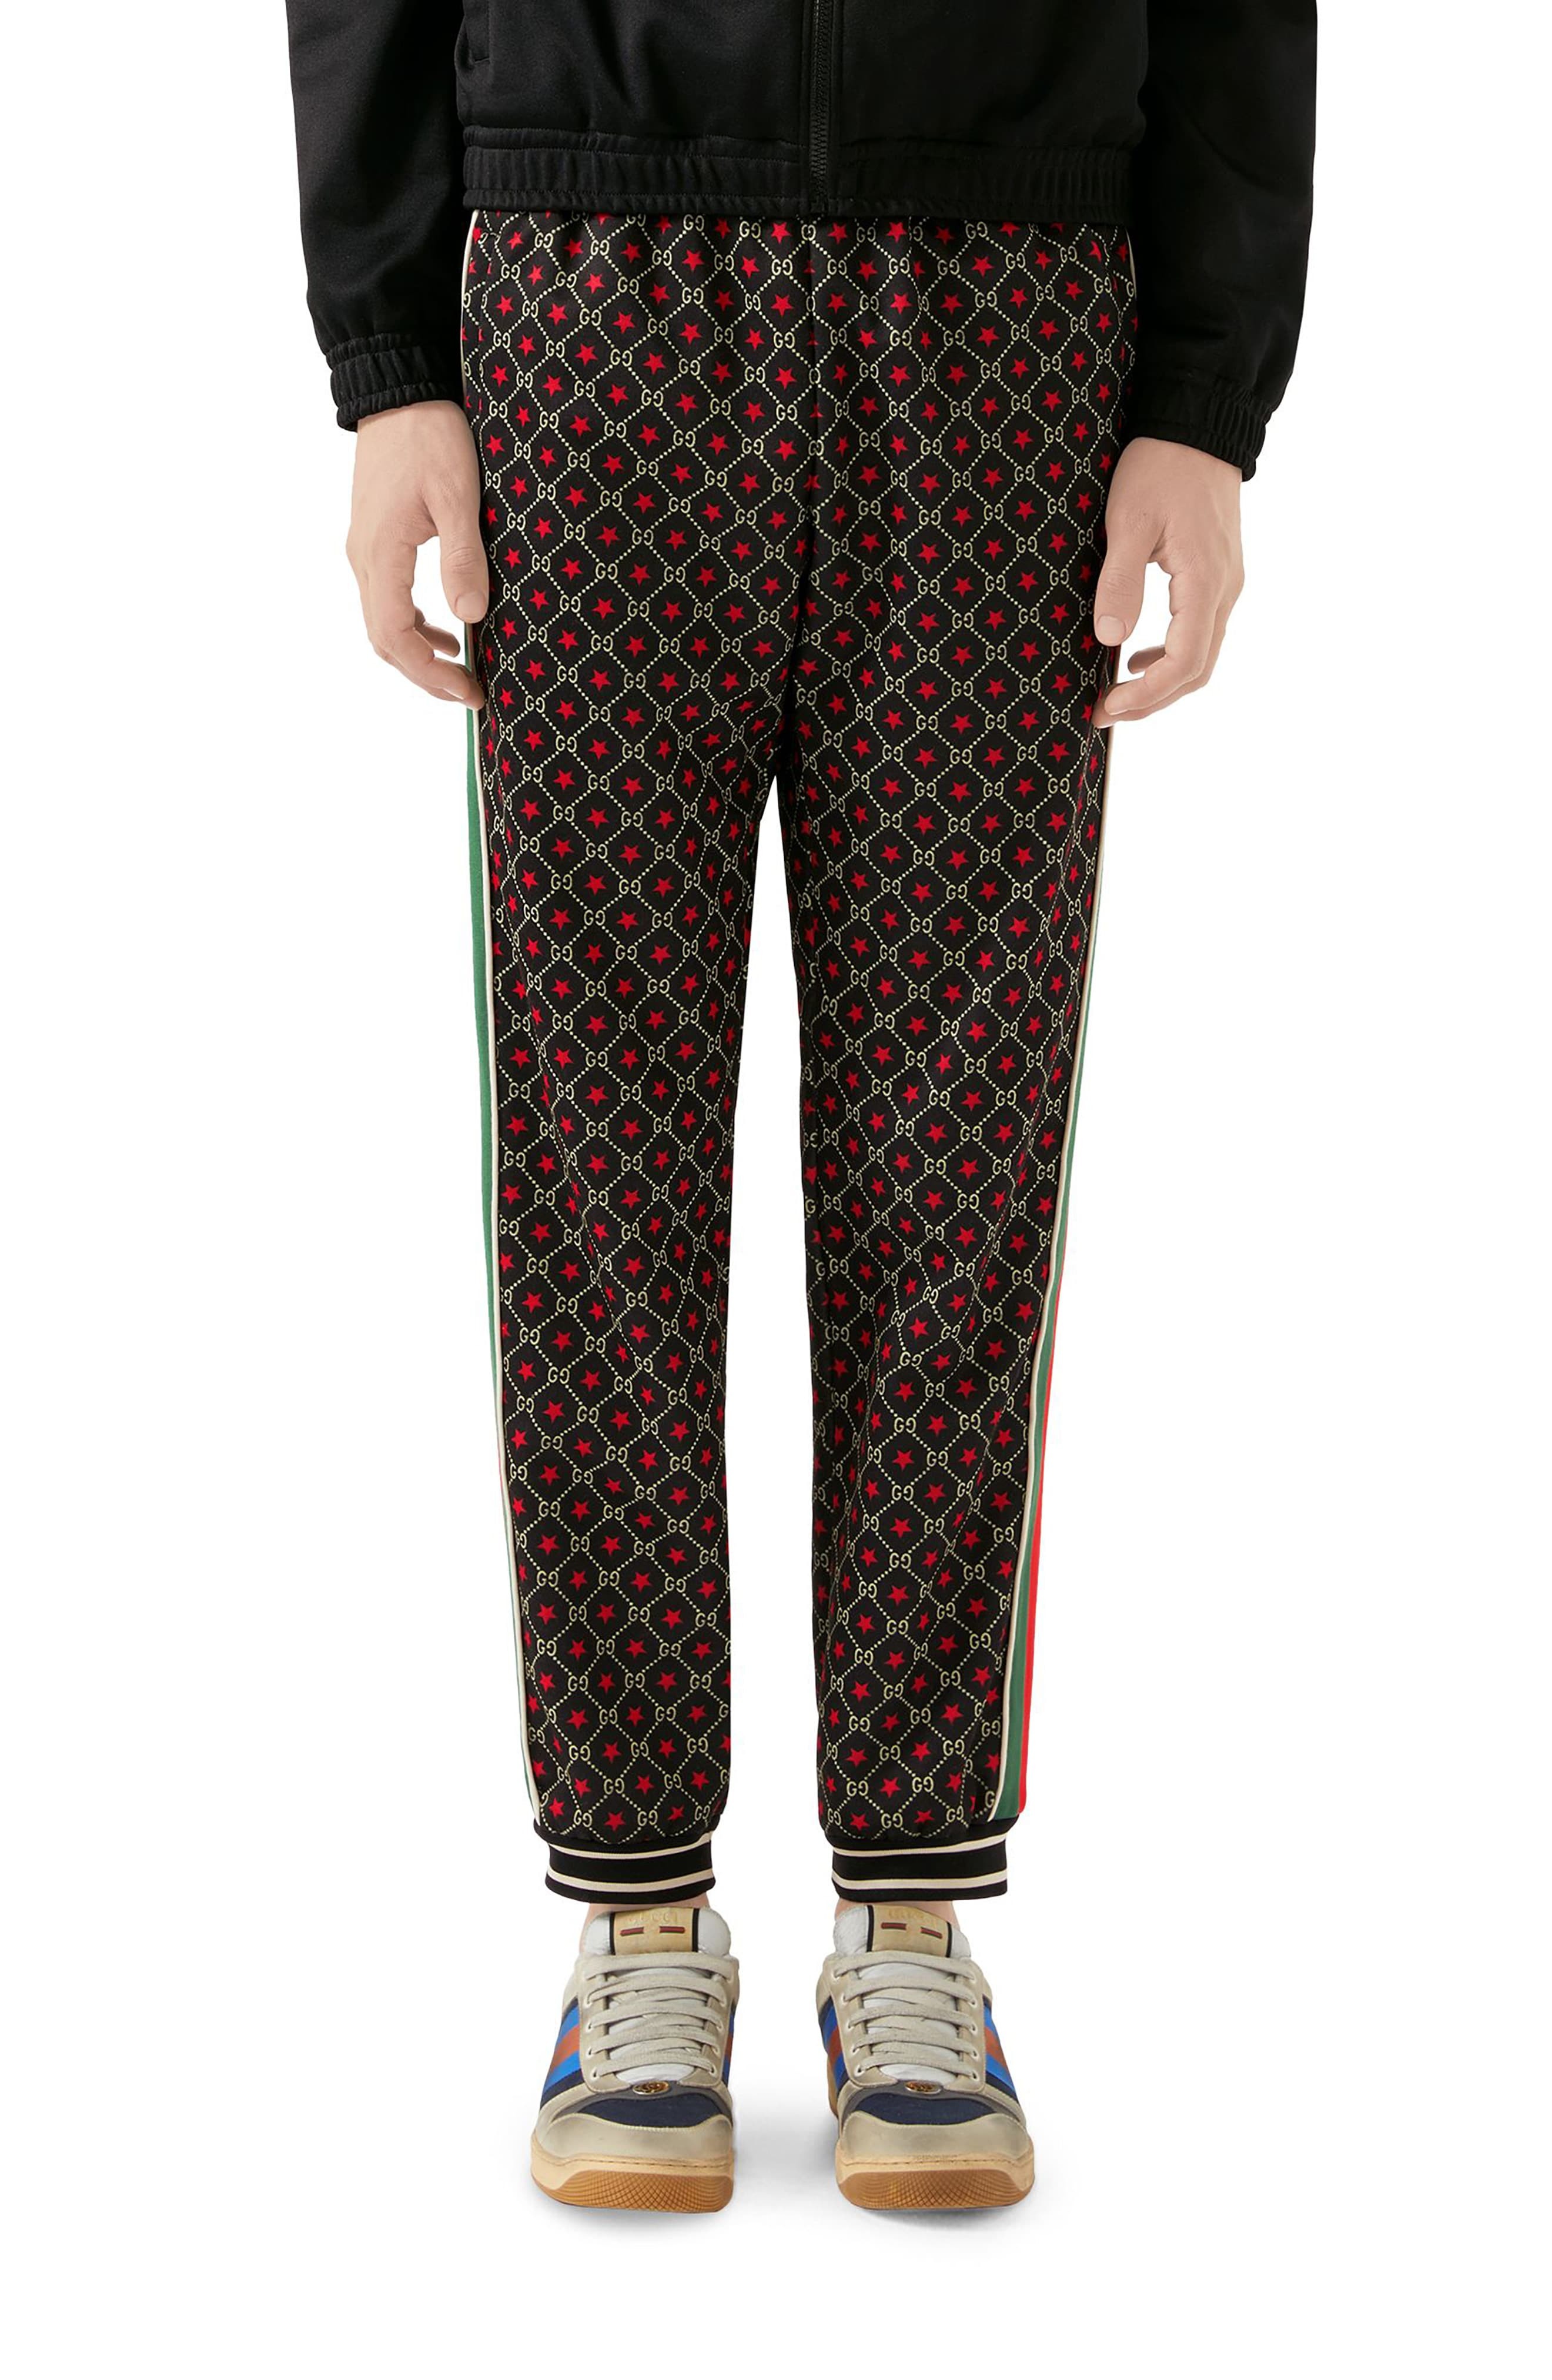 Gucci G Print Technical Jersey Jogger Pants, $1,500 | Nordstrom 